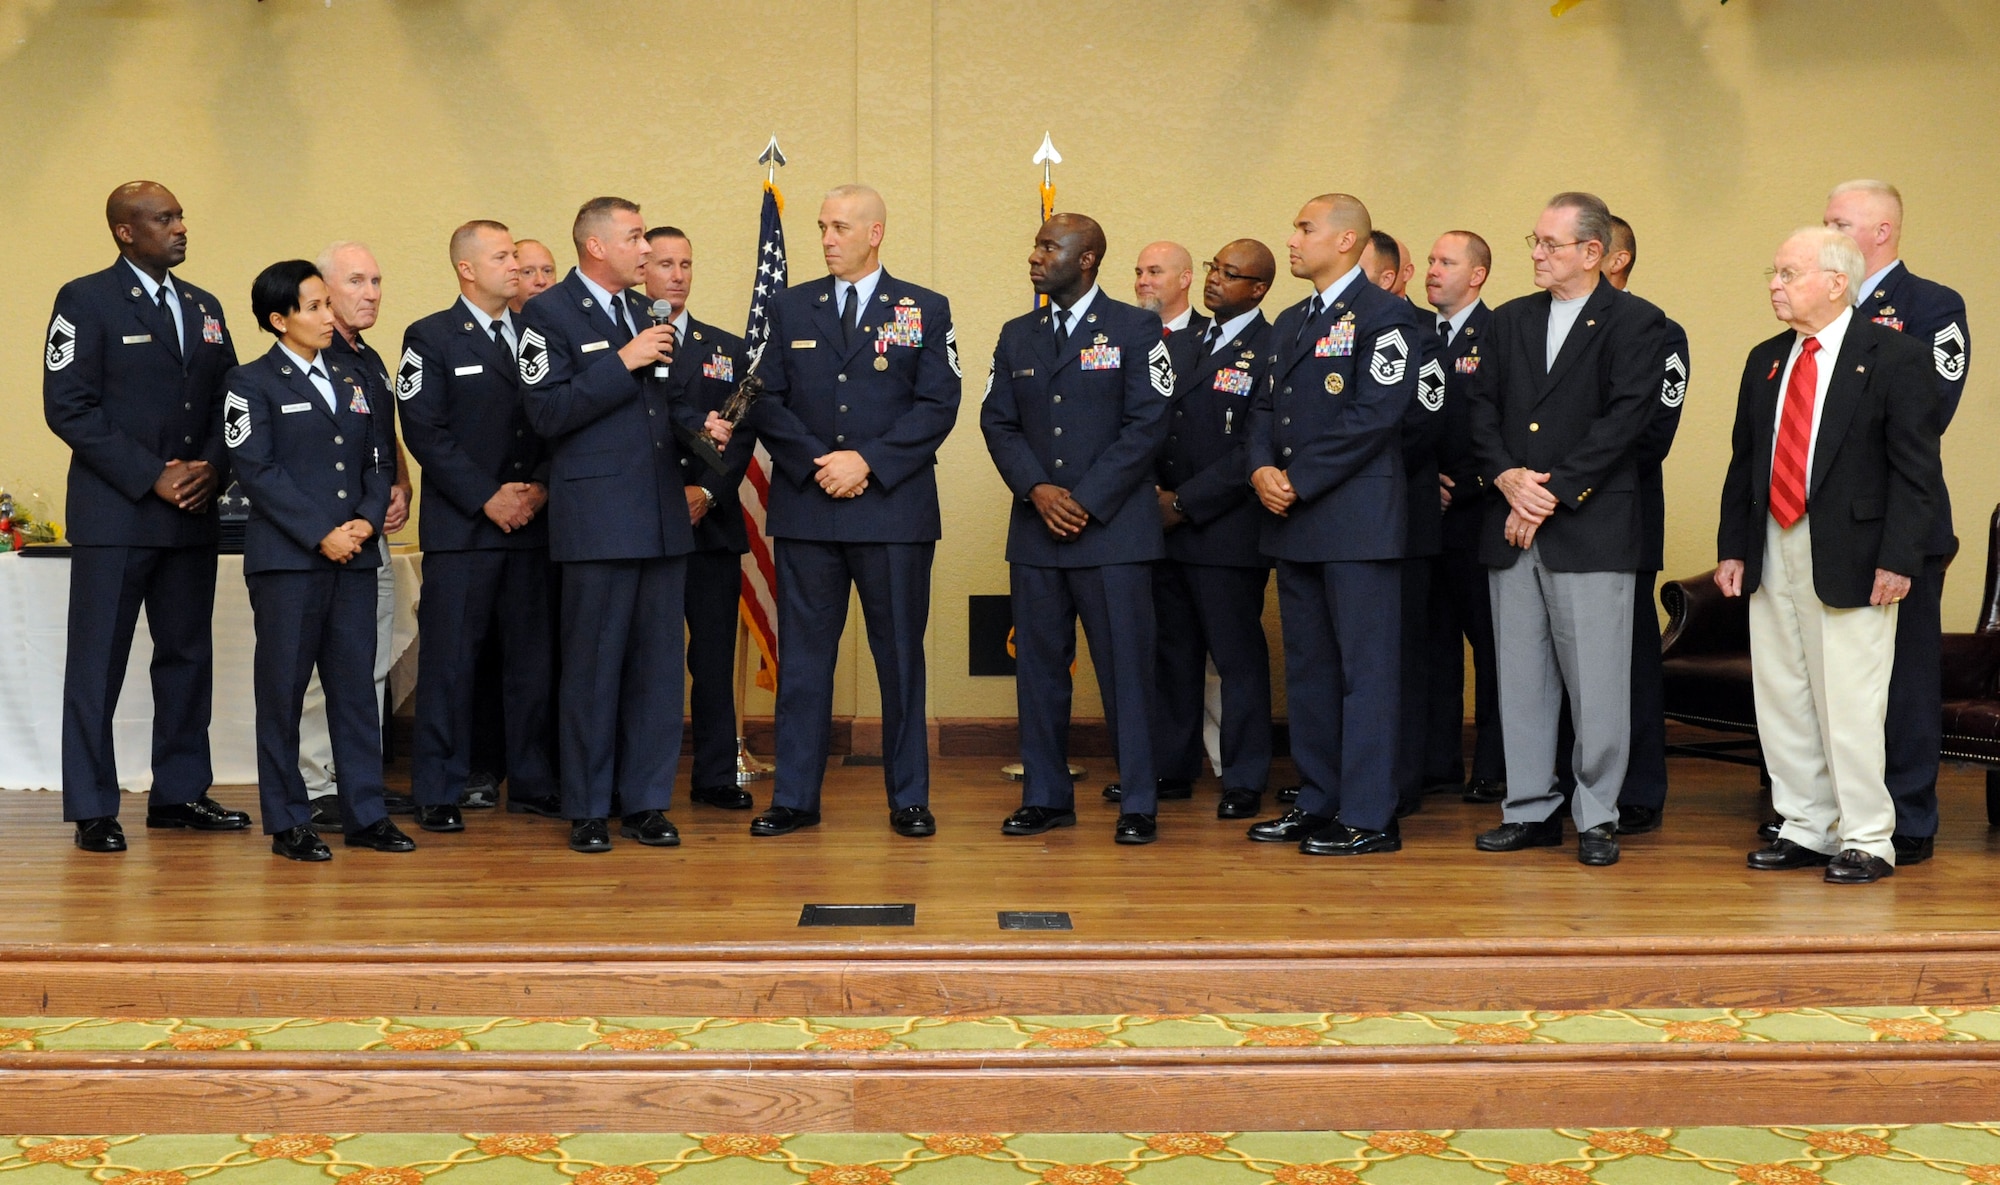 Chief Master Sgt. Leonard Trombley, 81st Training Support Squadron qualification training flight chief, and members of the Keesler Chief’s Group present Chief Master Sgt. Robert Winters, 81st Training Group superintendent, with a gift during his retirement ceremony at the Bay Breeze Event Center Sept. 8, 2016, on Keesler Air Force Base, Miss. Winters retired with more than 29 years of military service and served multiple assignments in California, Louisiana, Georgia, Colorado, Korea, and the United Kingdom. He also worked as an electronic warfare officer in support of more than 700 soldiers in multiple locations throughout Iraq. (U.S. Air Force photo by Kemberly Groue/Released)